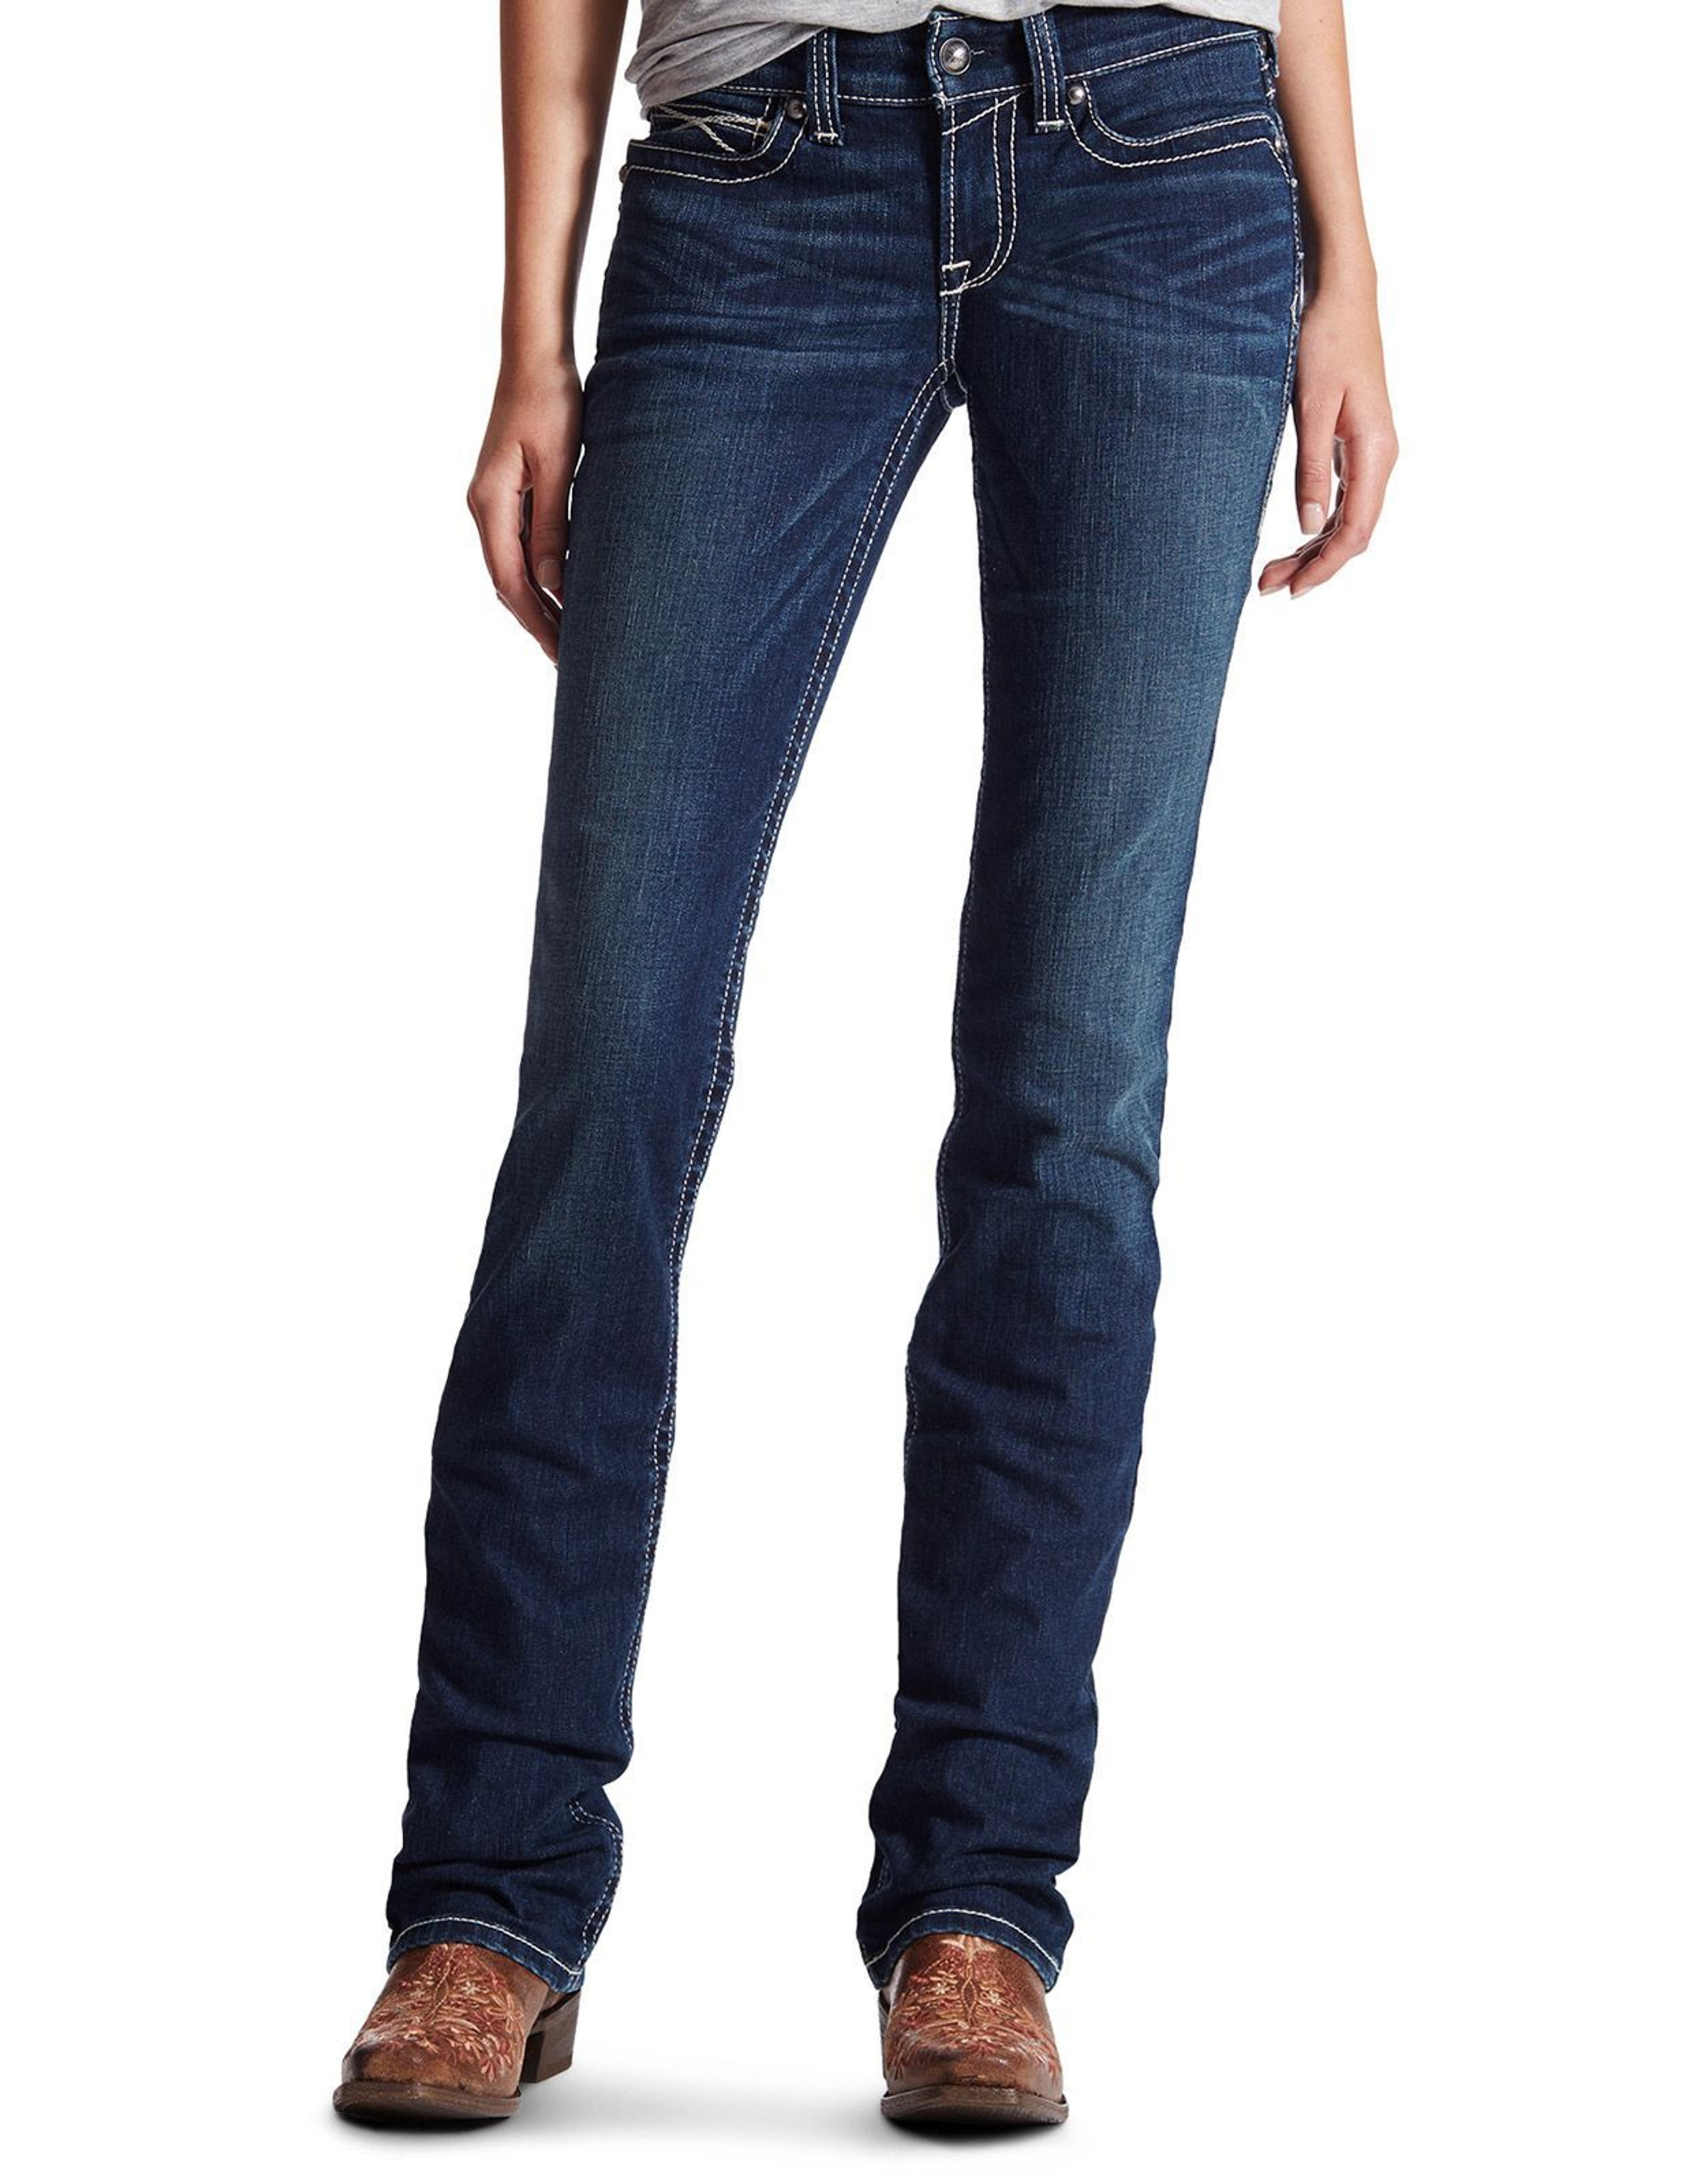 Ariat Women's R.E.A.L. Stackable Jeans from Langston's